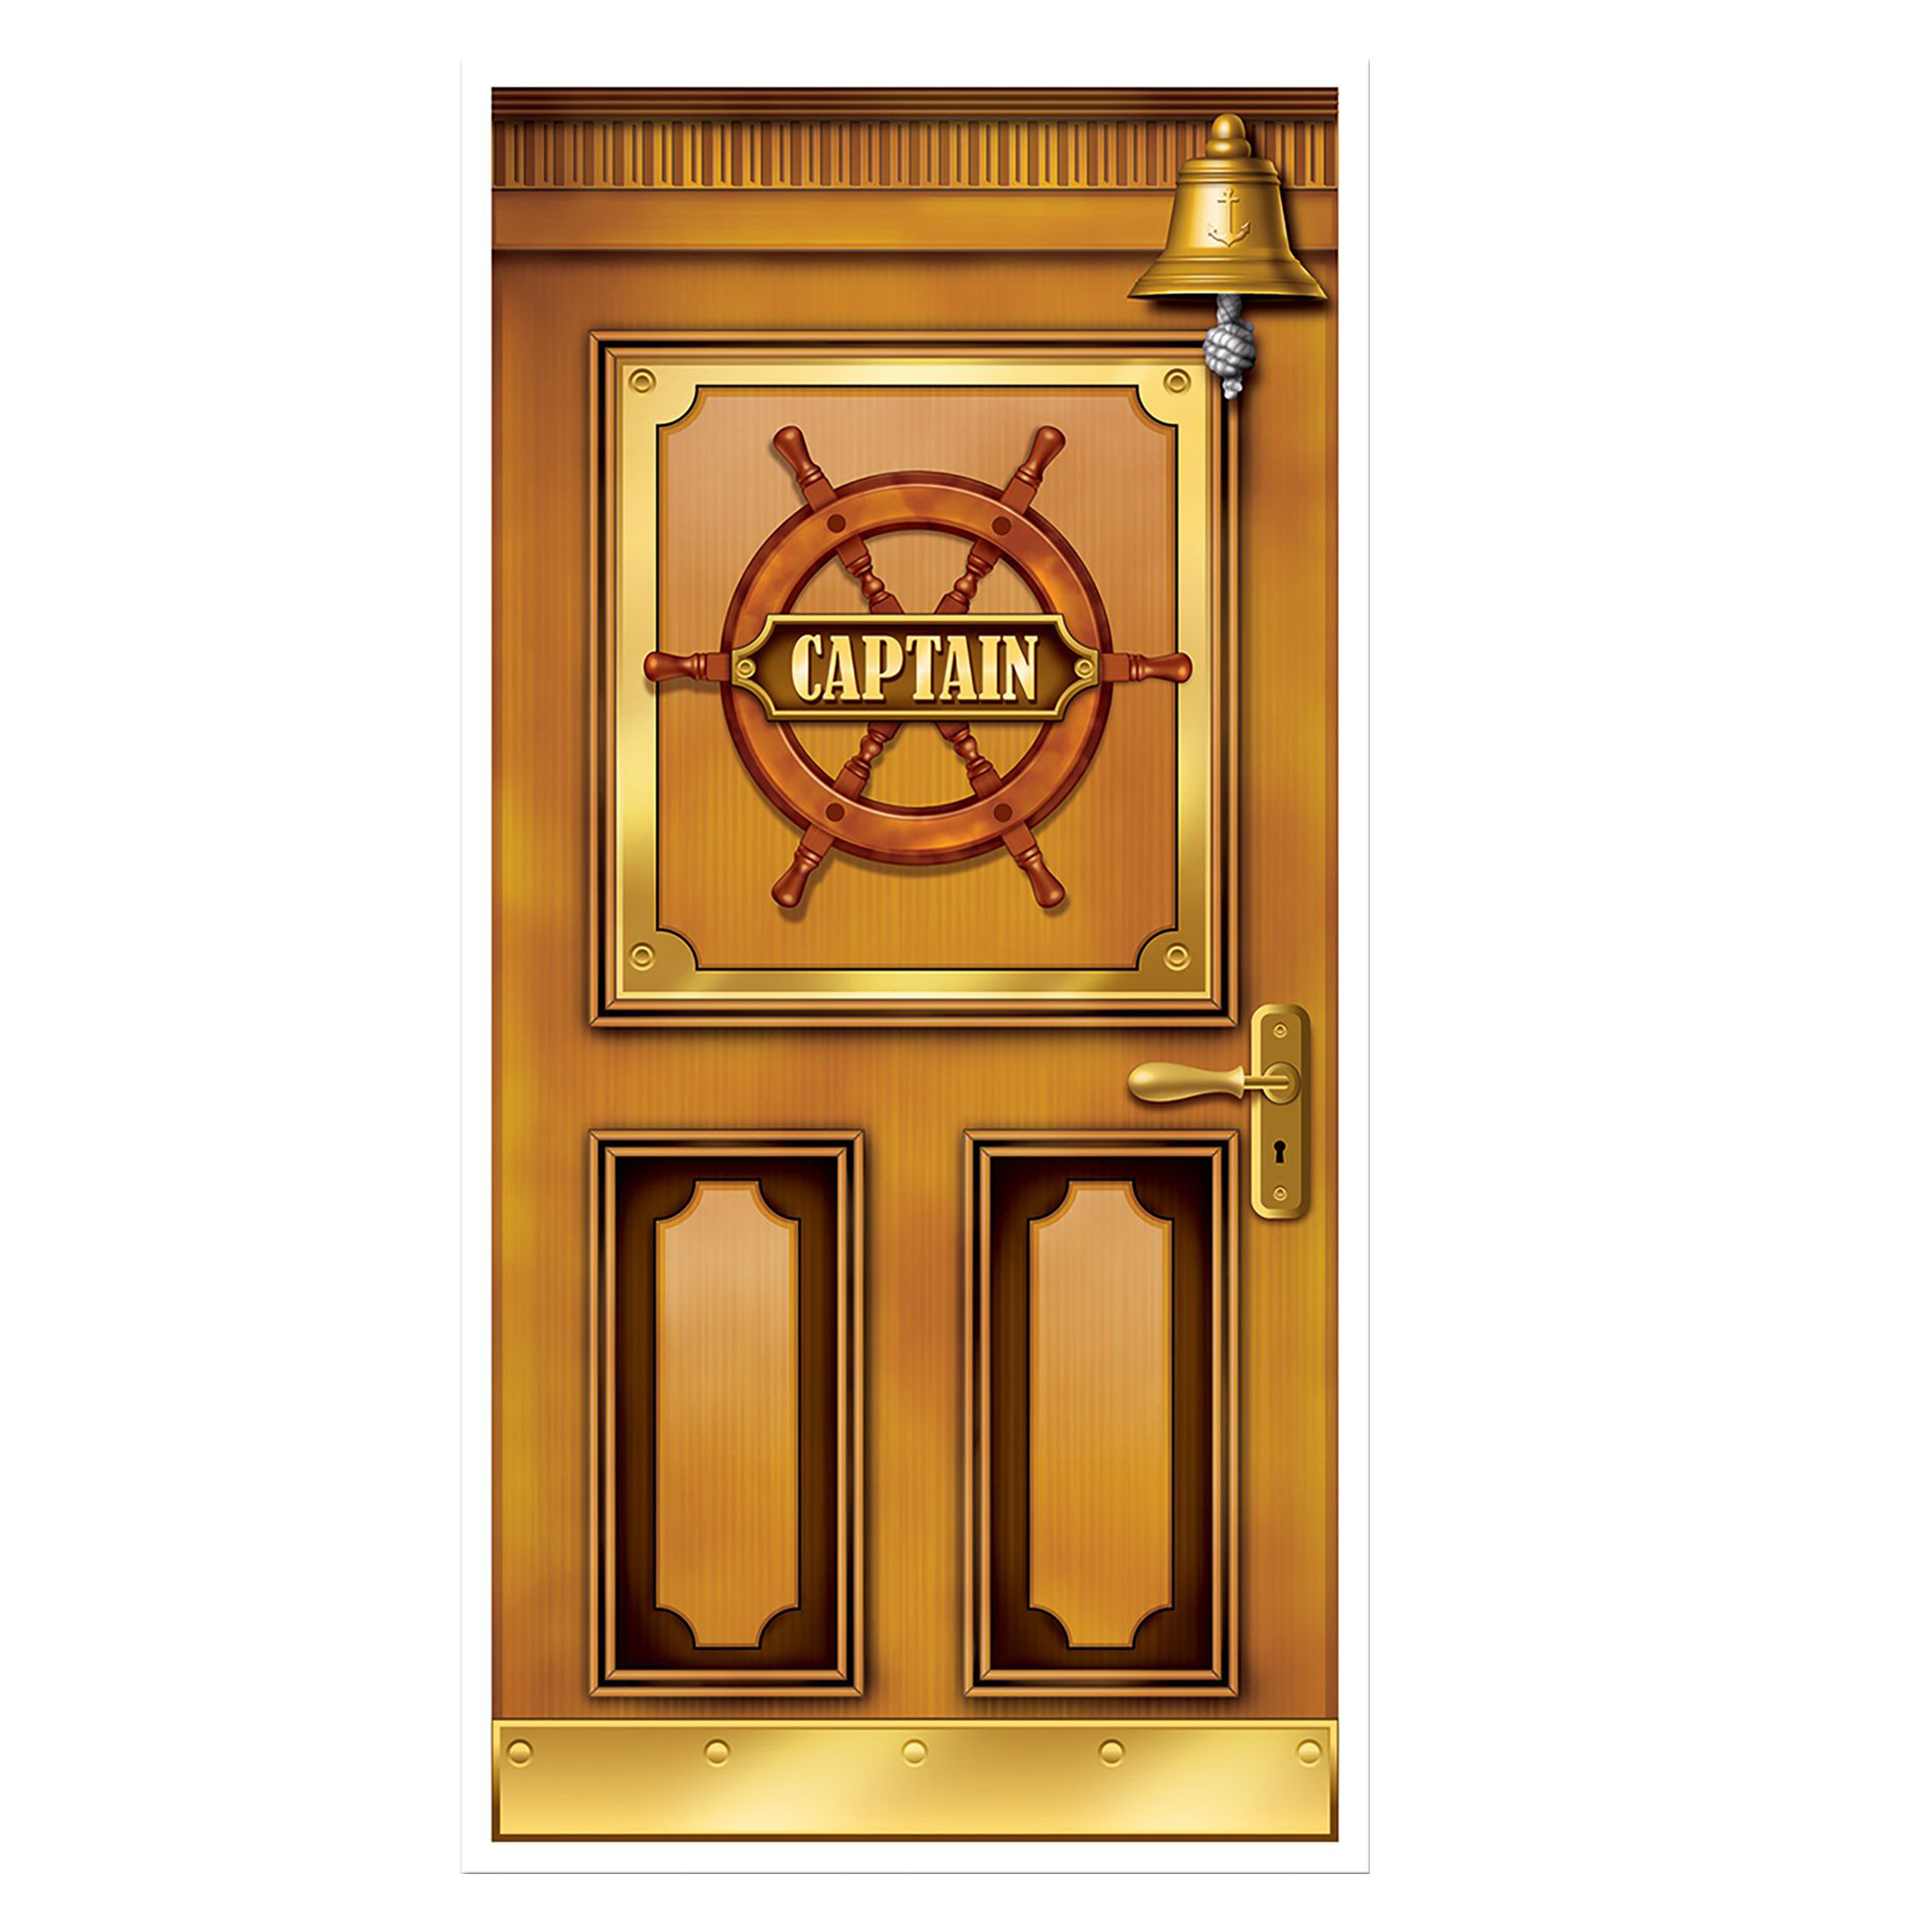 Cruise Ship Door Cover by Windy City Novelties